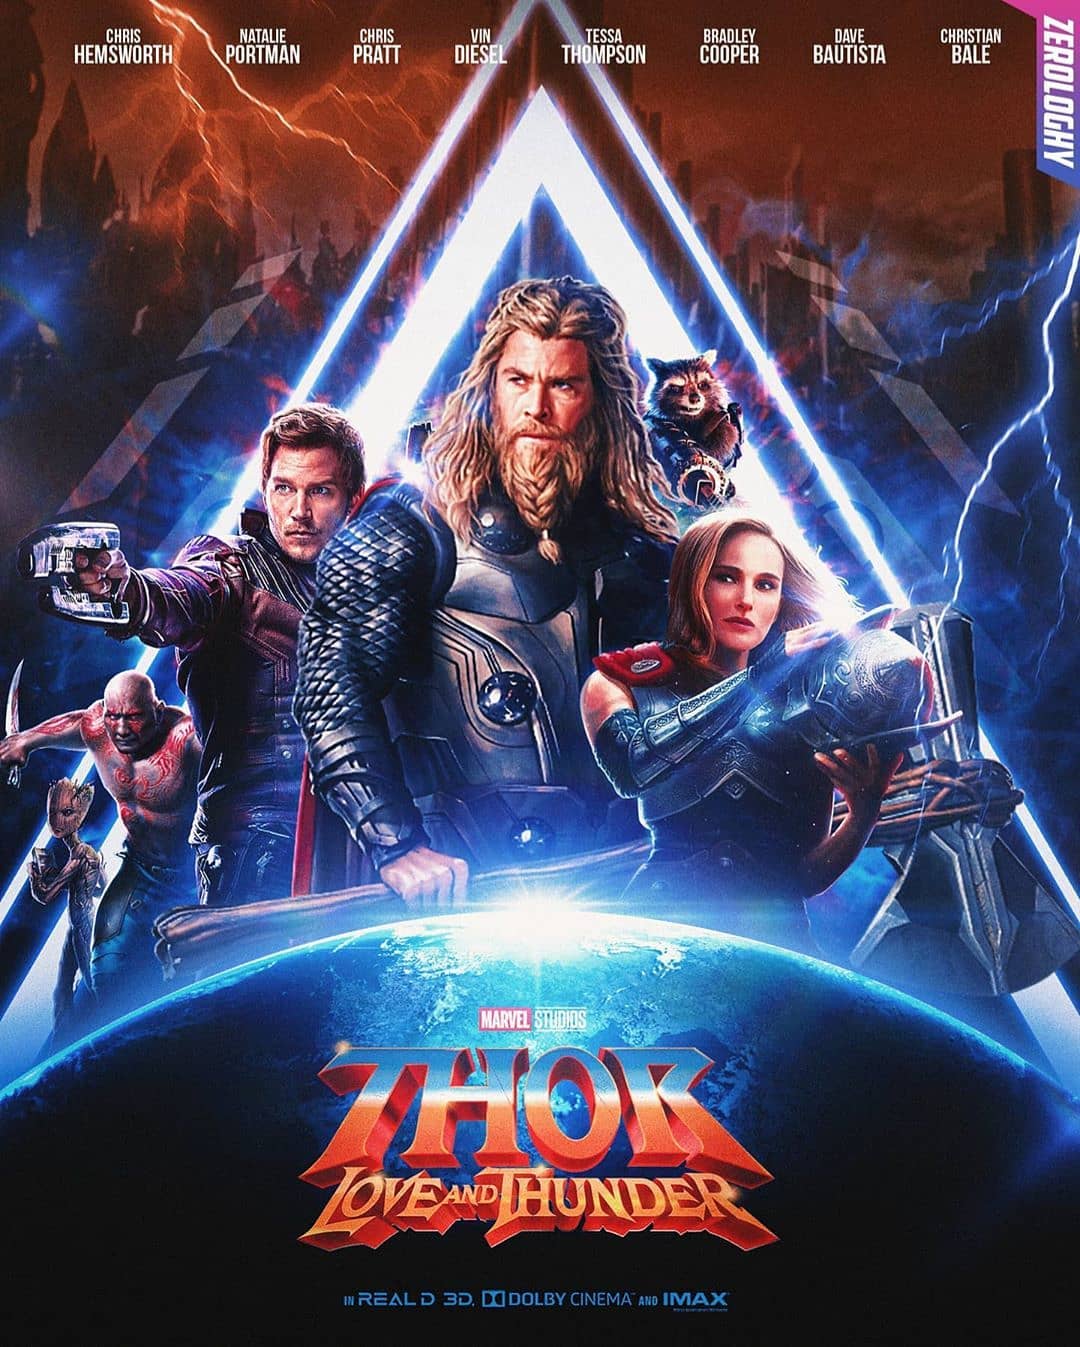 Thor Love and Thunder cast, release date, trailer, plot and what we